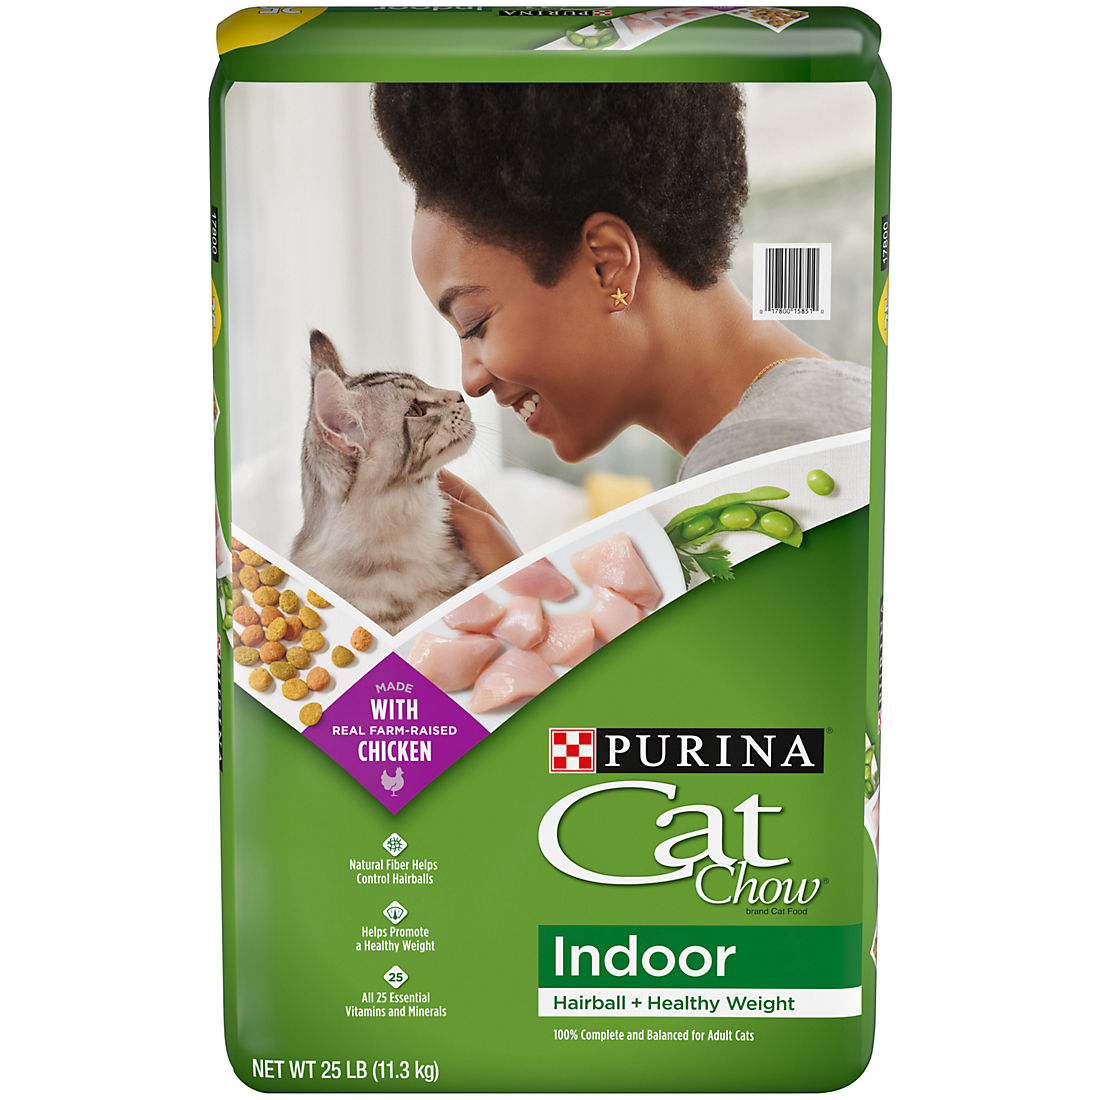 Purina Cat Chow Complete Dry Cat Food Bag 25 lb 